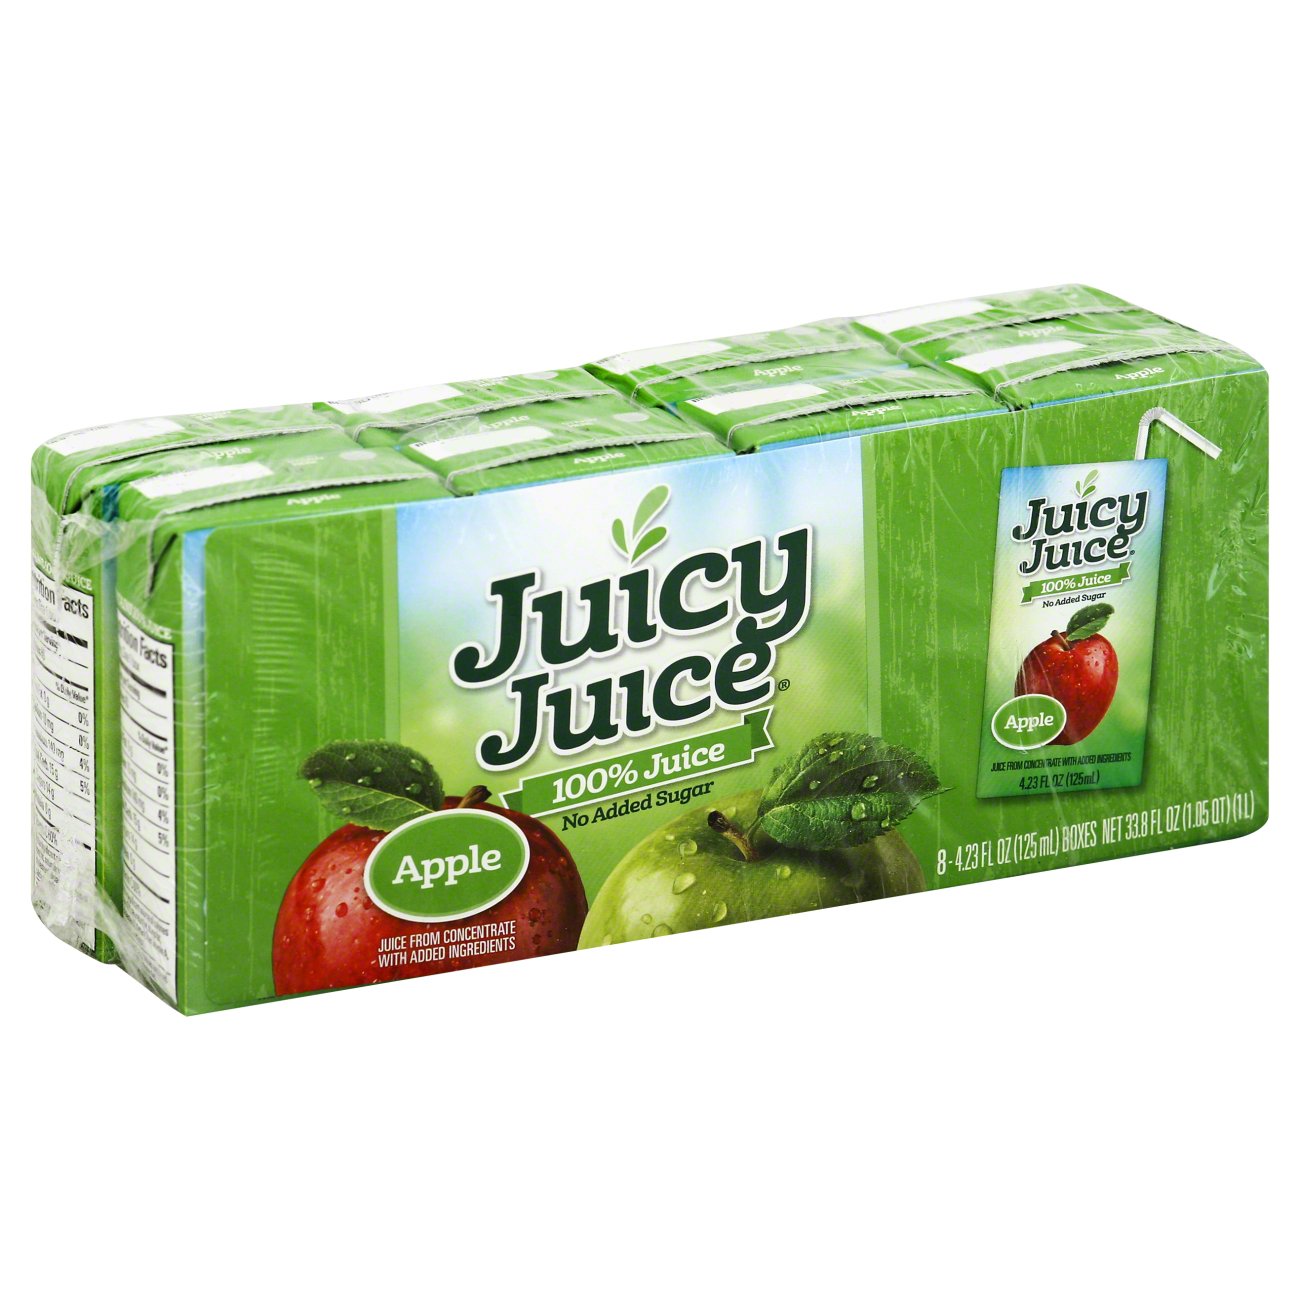 images of juice boxes